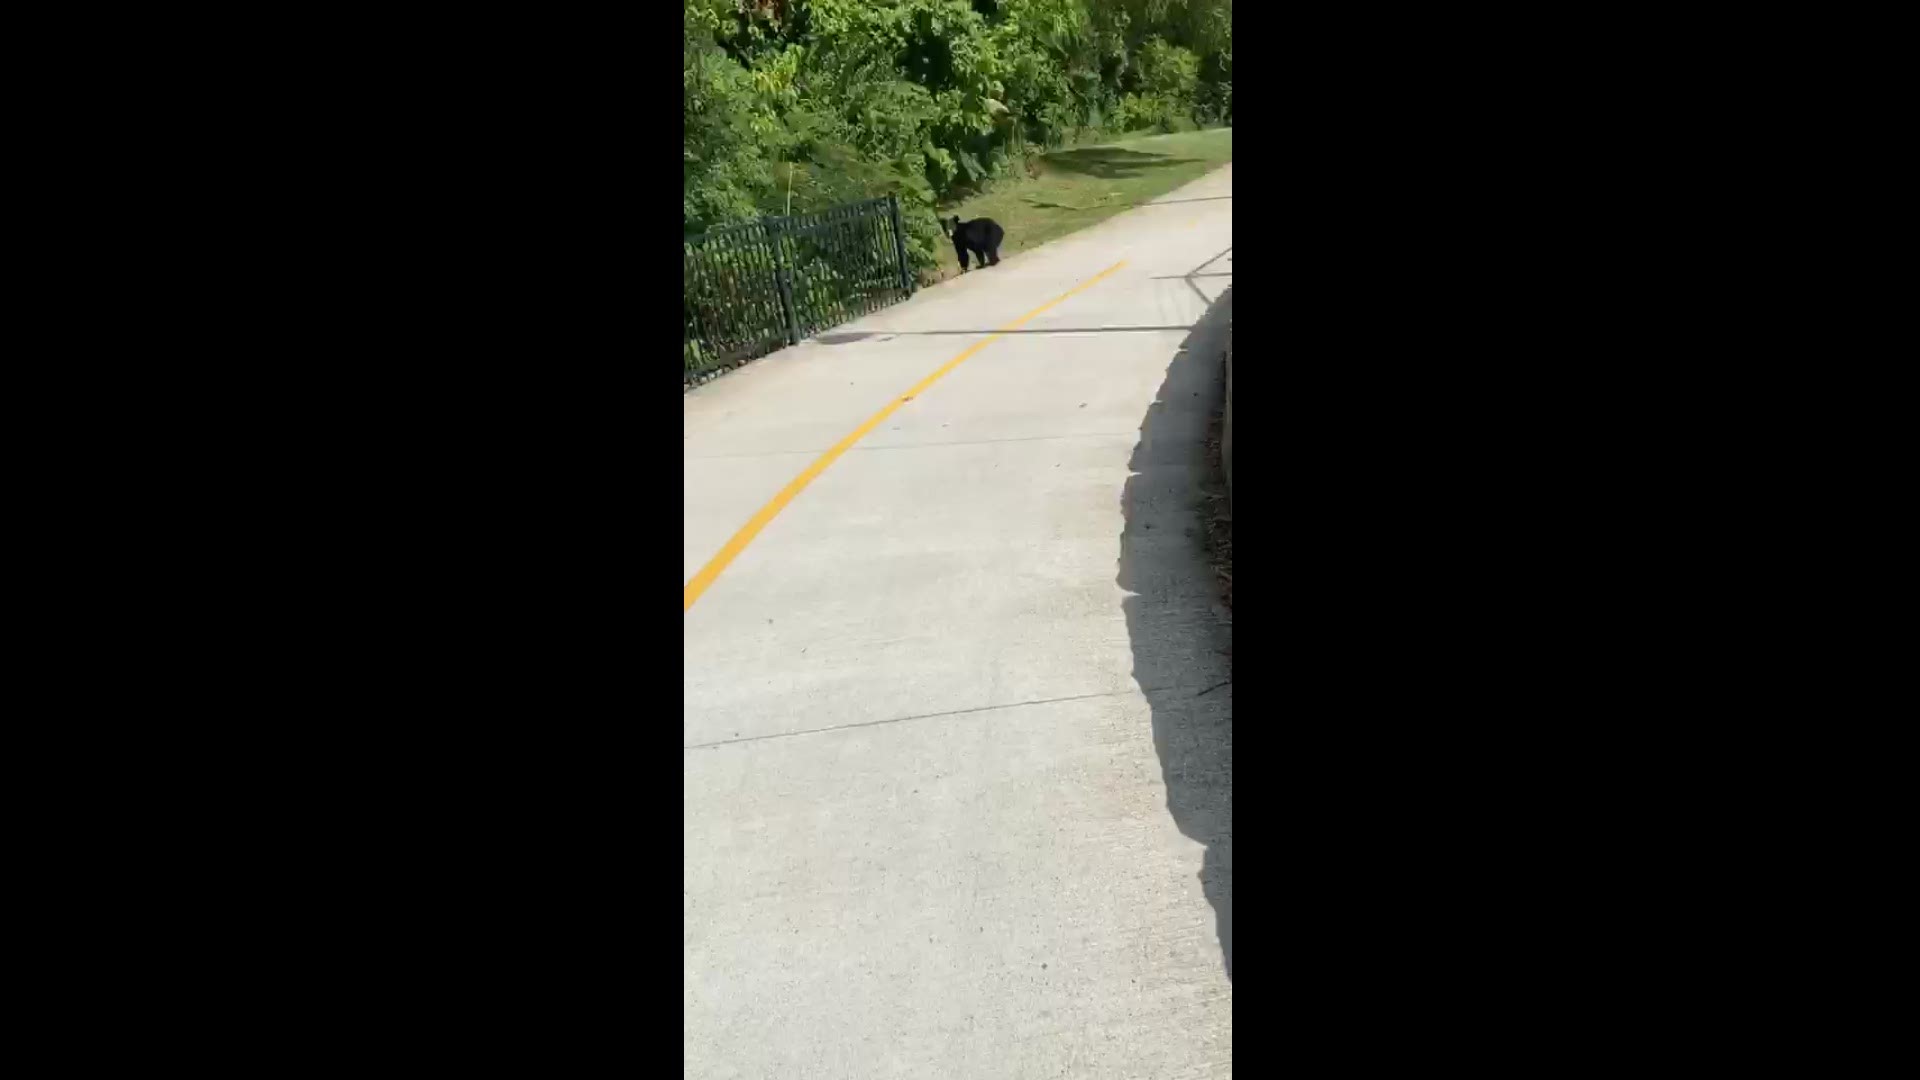 A baby black bear spotted on the Razorback Greenway trail around Walker Park and 15th St.